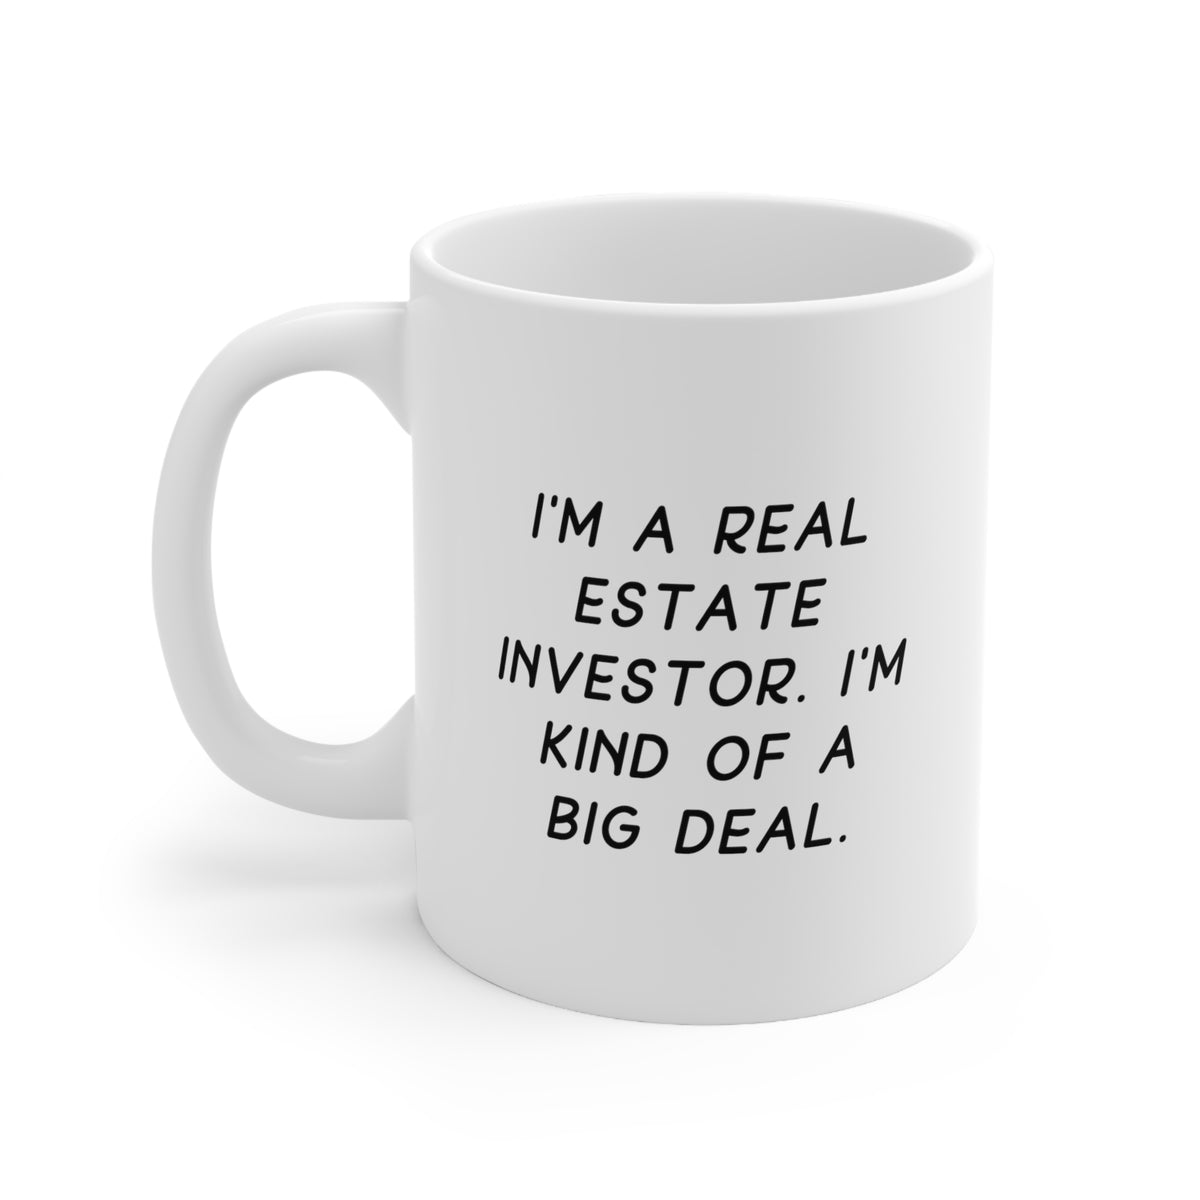 Special Real Estate Investor Gifts, I'm a Real Estate, Real Estate Investor 11oz 15oz Mug From Boss, Gifts For Coworkers, Gifts for real estate investors, Fun gifts for real estate investors, Unique